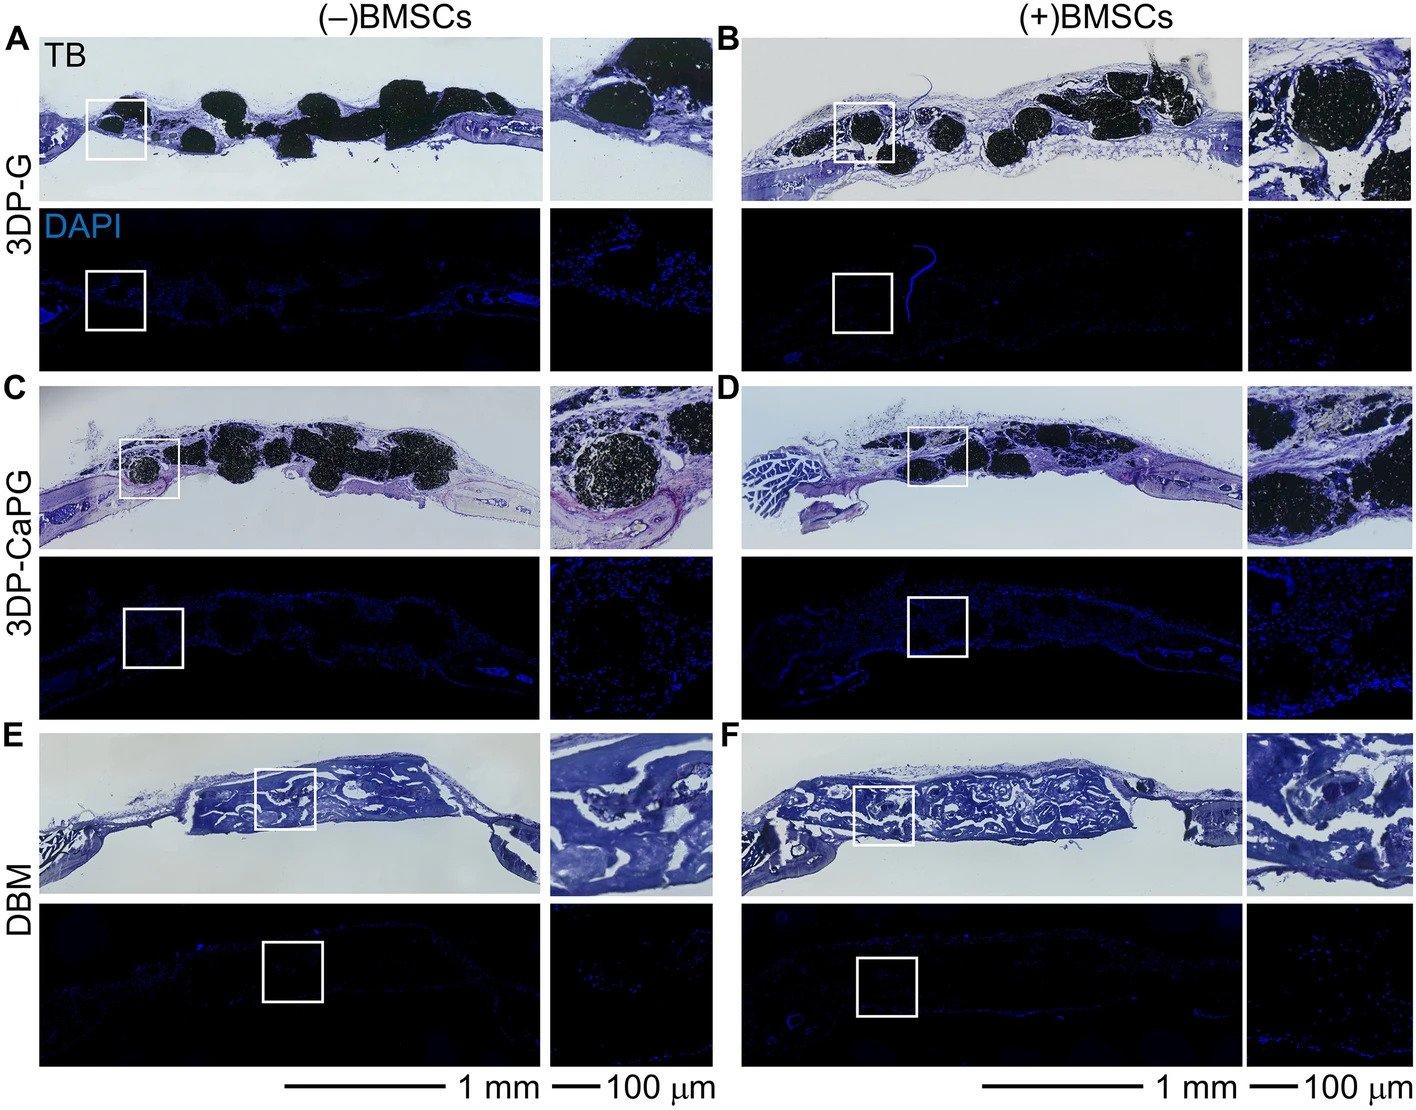 Biocompatibility of the matrices in a mouse calvarial defect model. Image via Nature.